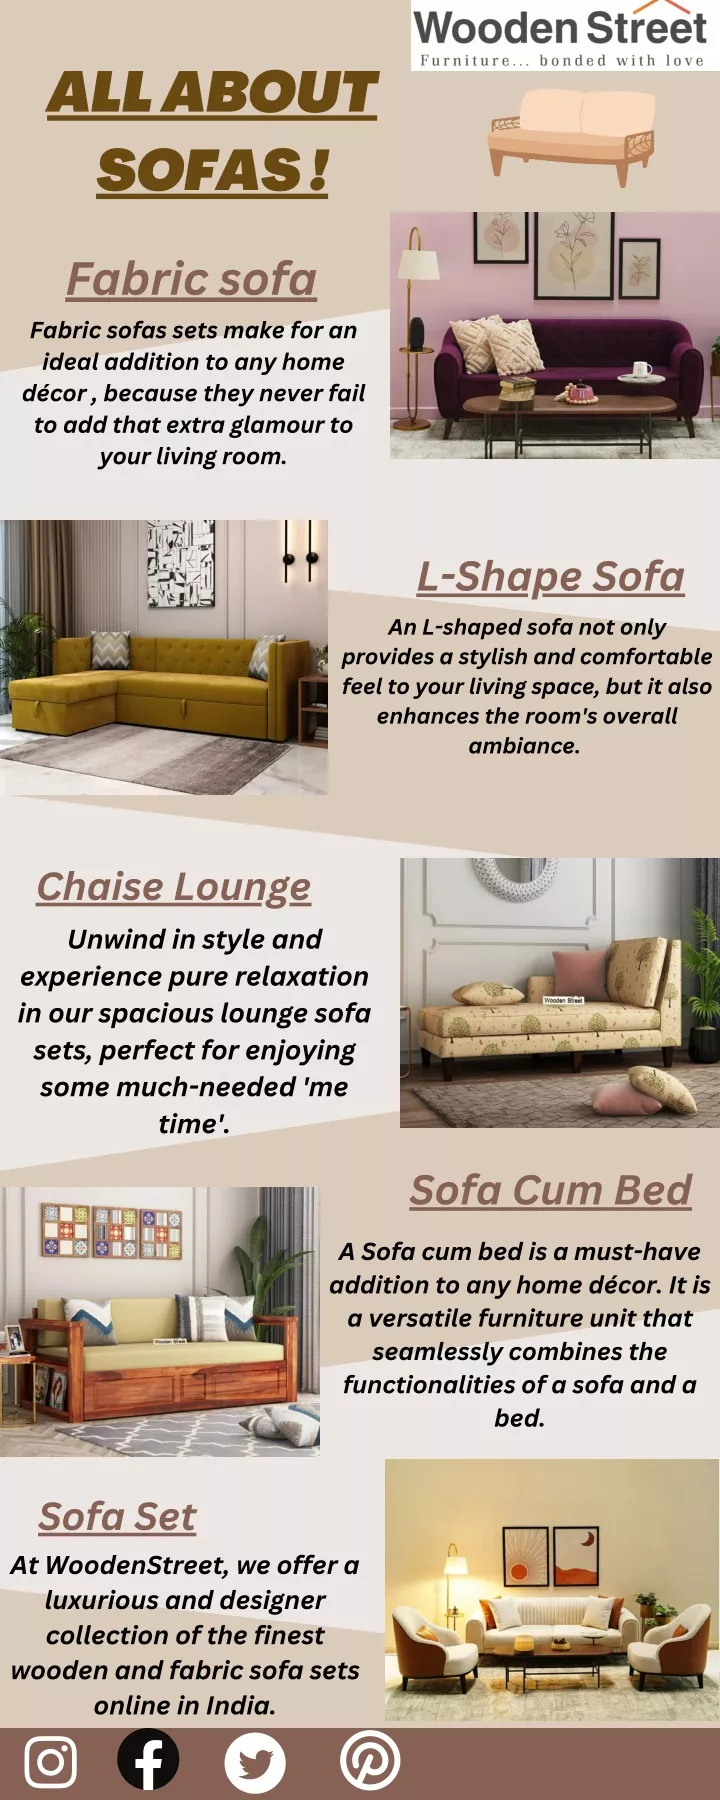 all about sofas